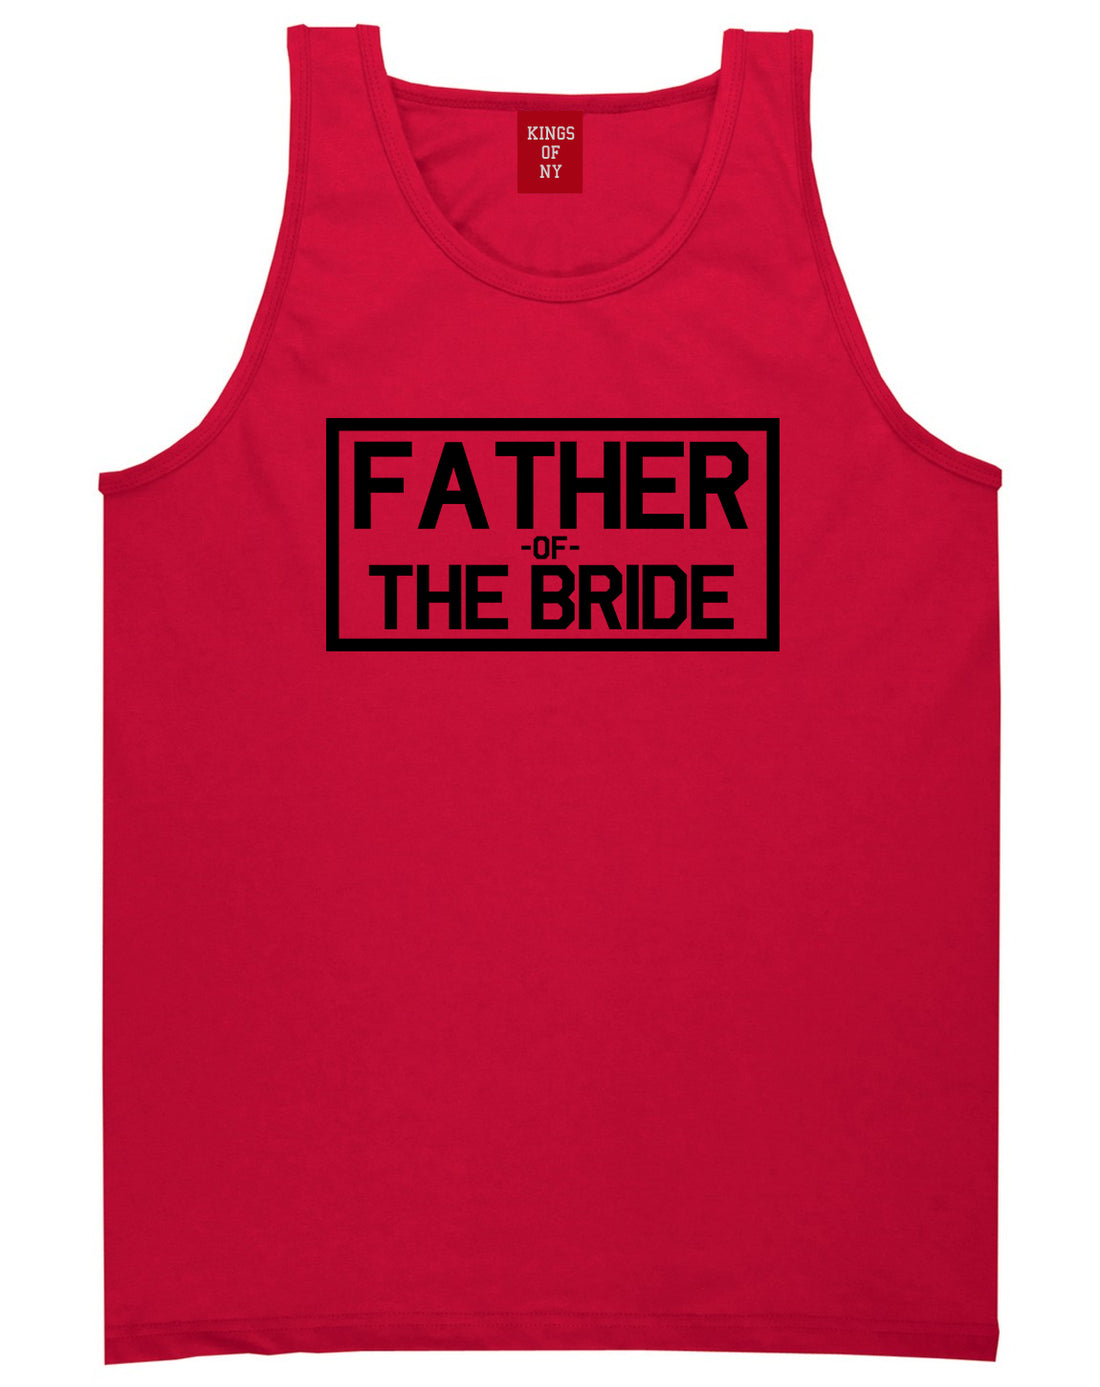 Father_Of_The_Bride Mens Red Tank Top Shirt by Kings Of NY